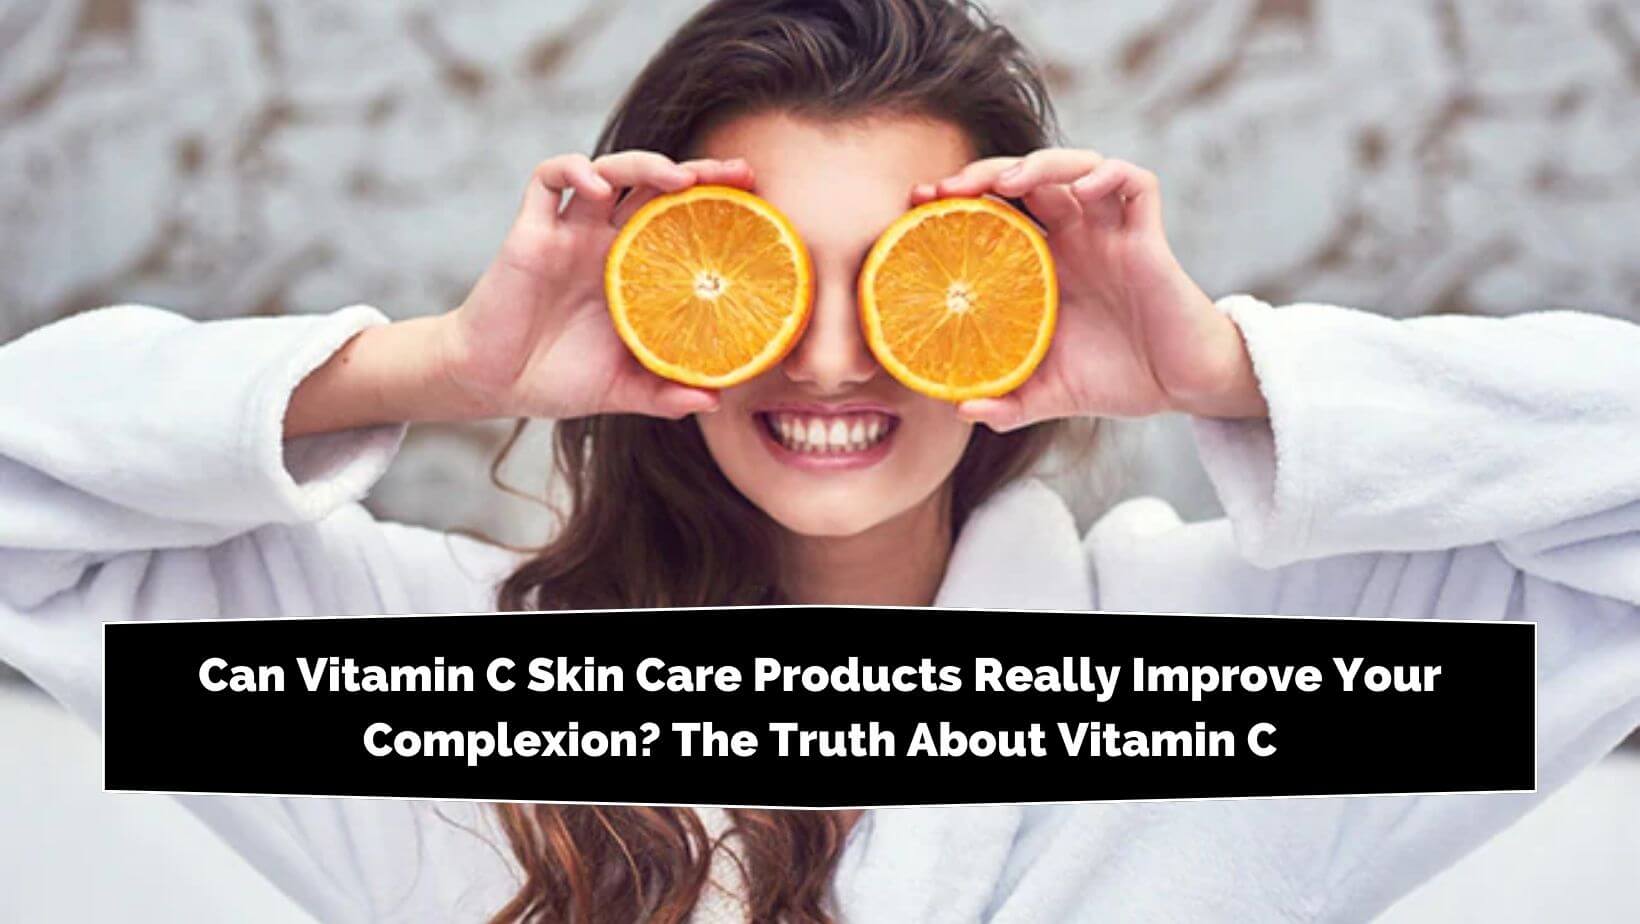 Can Vitamin C Skin Care Products Really Improve Your Complexion?